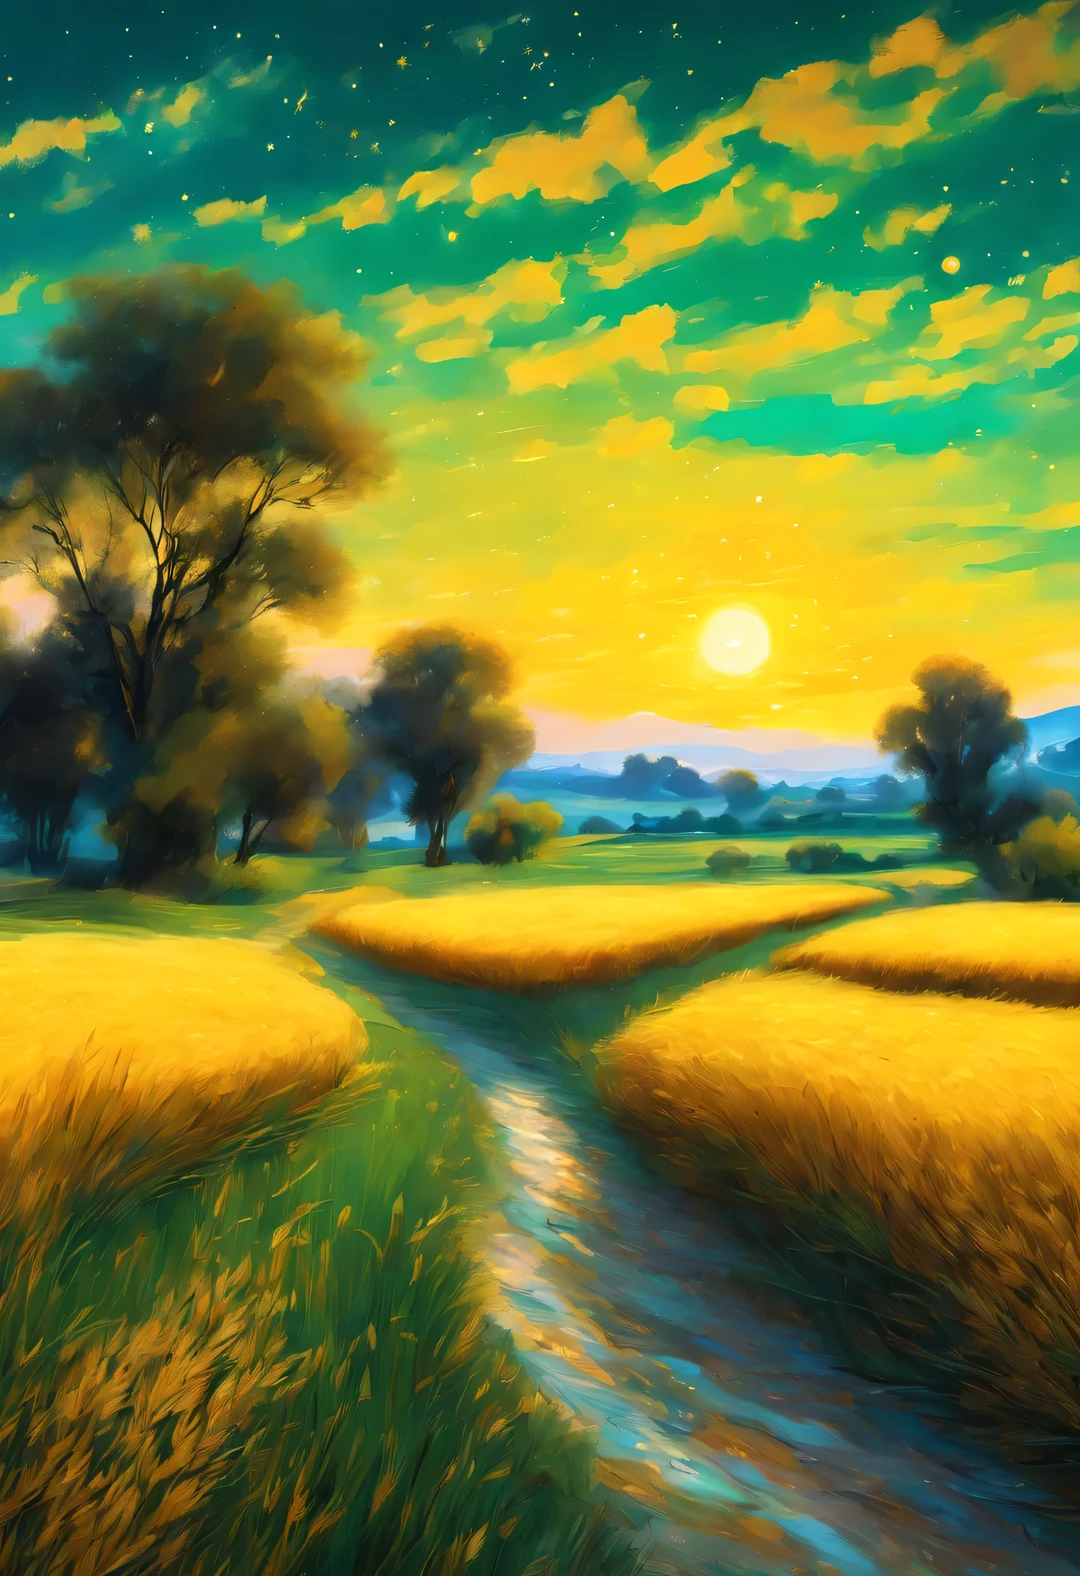 best quality, 4k, 8k, high-rise, masterpiece: 1.2, Super detailed, actual: 1.37, Beautiful and delicate eyes, Beautiful and delicate lips, Extremely detailed eyes and face, long eyelashes, wheat field, stagnant sky, dreamy atmosphere, bright color palette, Vibrant shades, Impressionist brushstrokes, Subtle lighting effects, sunset on the horizon, Lush green landscape, Wheat dances in the wind, A Peaceful and tranquil atmosphere, Harmony between nature and sky, Playful shadows and highlights, textured brushstrokes, Abundant and vibrant crops, Endless golden wheat ears, dusk atmosphere, Tranquil pastoral scenery, Shining stars light up the night, Star clusters shine in the universe, magnificent starry night, Peaceful and tranquil atmosphere, Quiet environment、Picturesque, Inspired by the style and techniques of Van Gogh, Sublime and atmospheric depiction, ethereal beauty, and charming celestial phenomena.